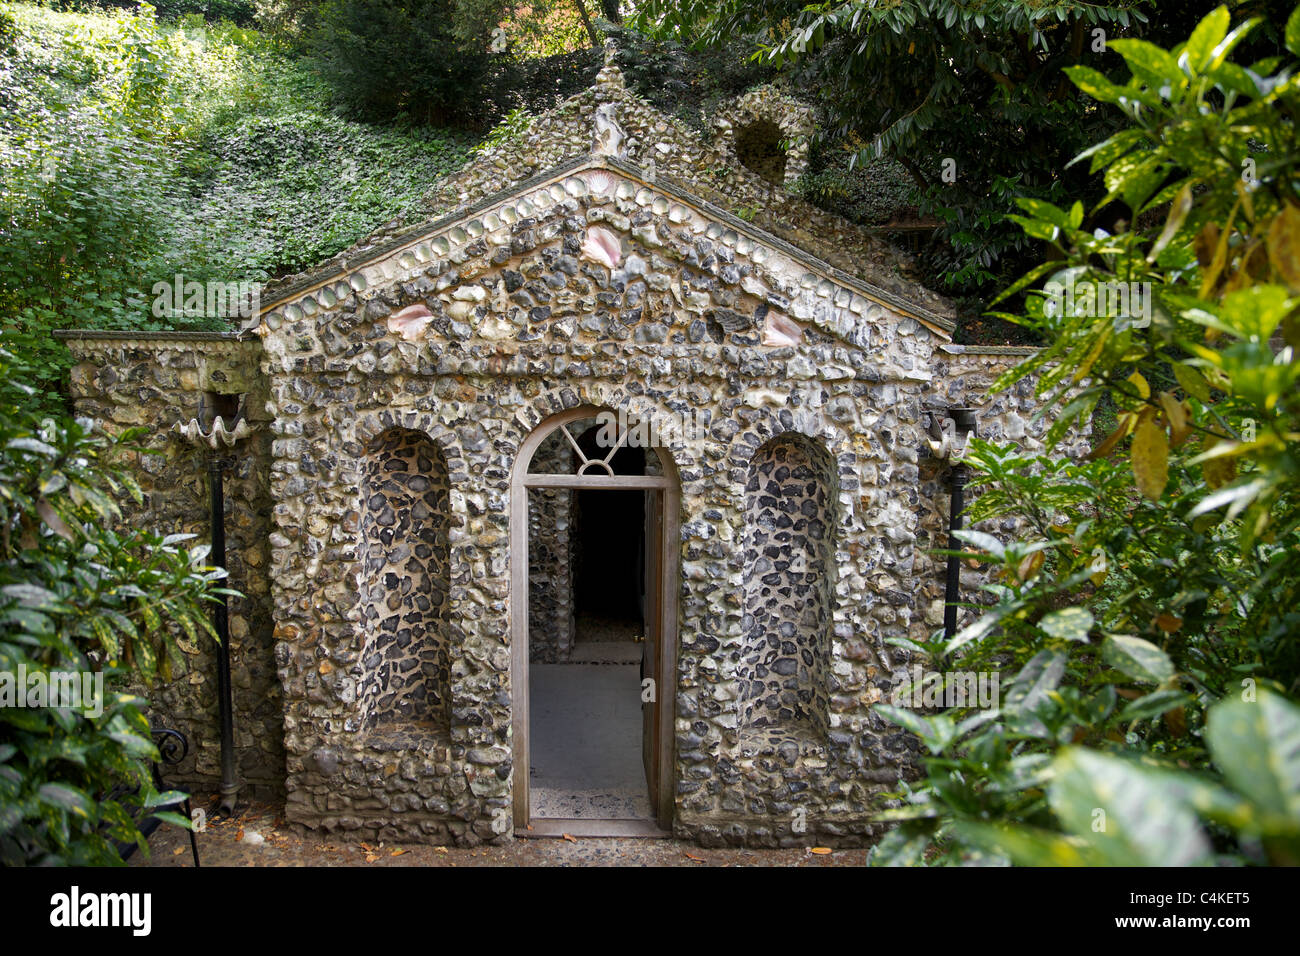 Entrance to Scotts grotto, Ware, Hertfordshire, the biggest grotto in England Stock Photo